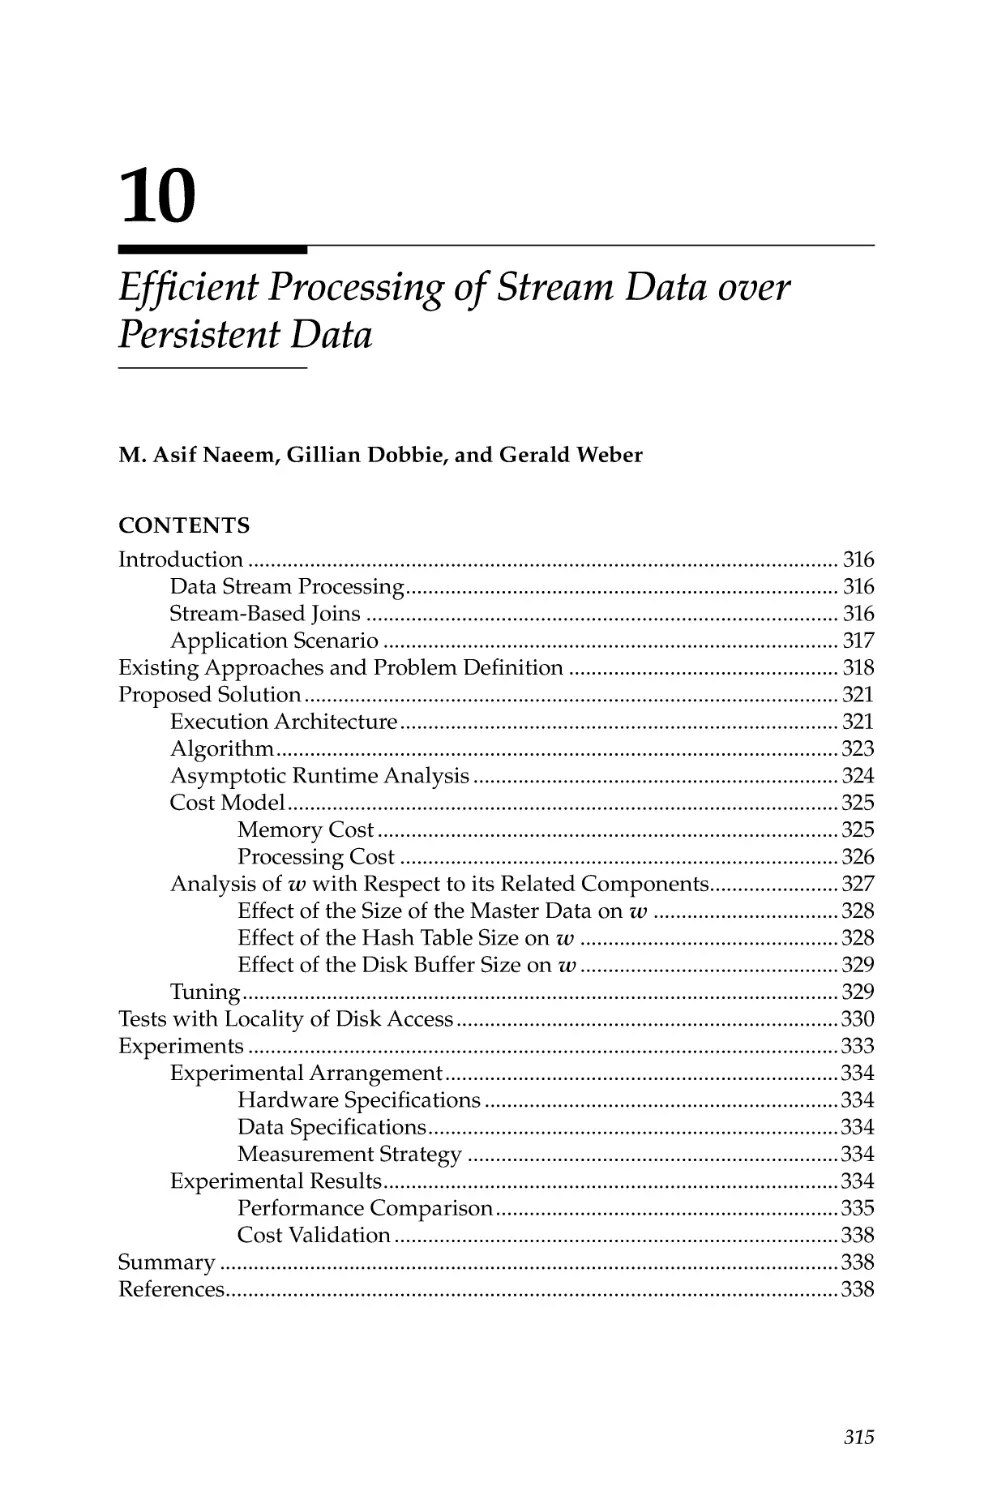 10. Efficient Processing of Stream Data over Persistent Data